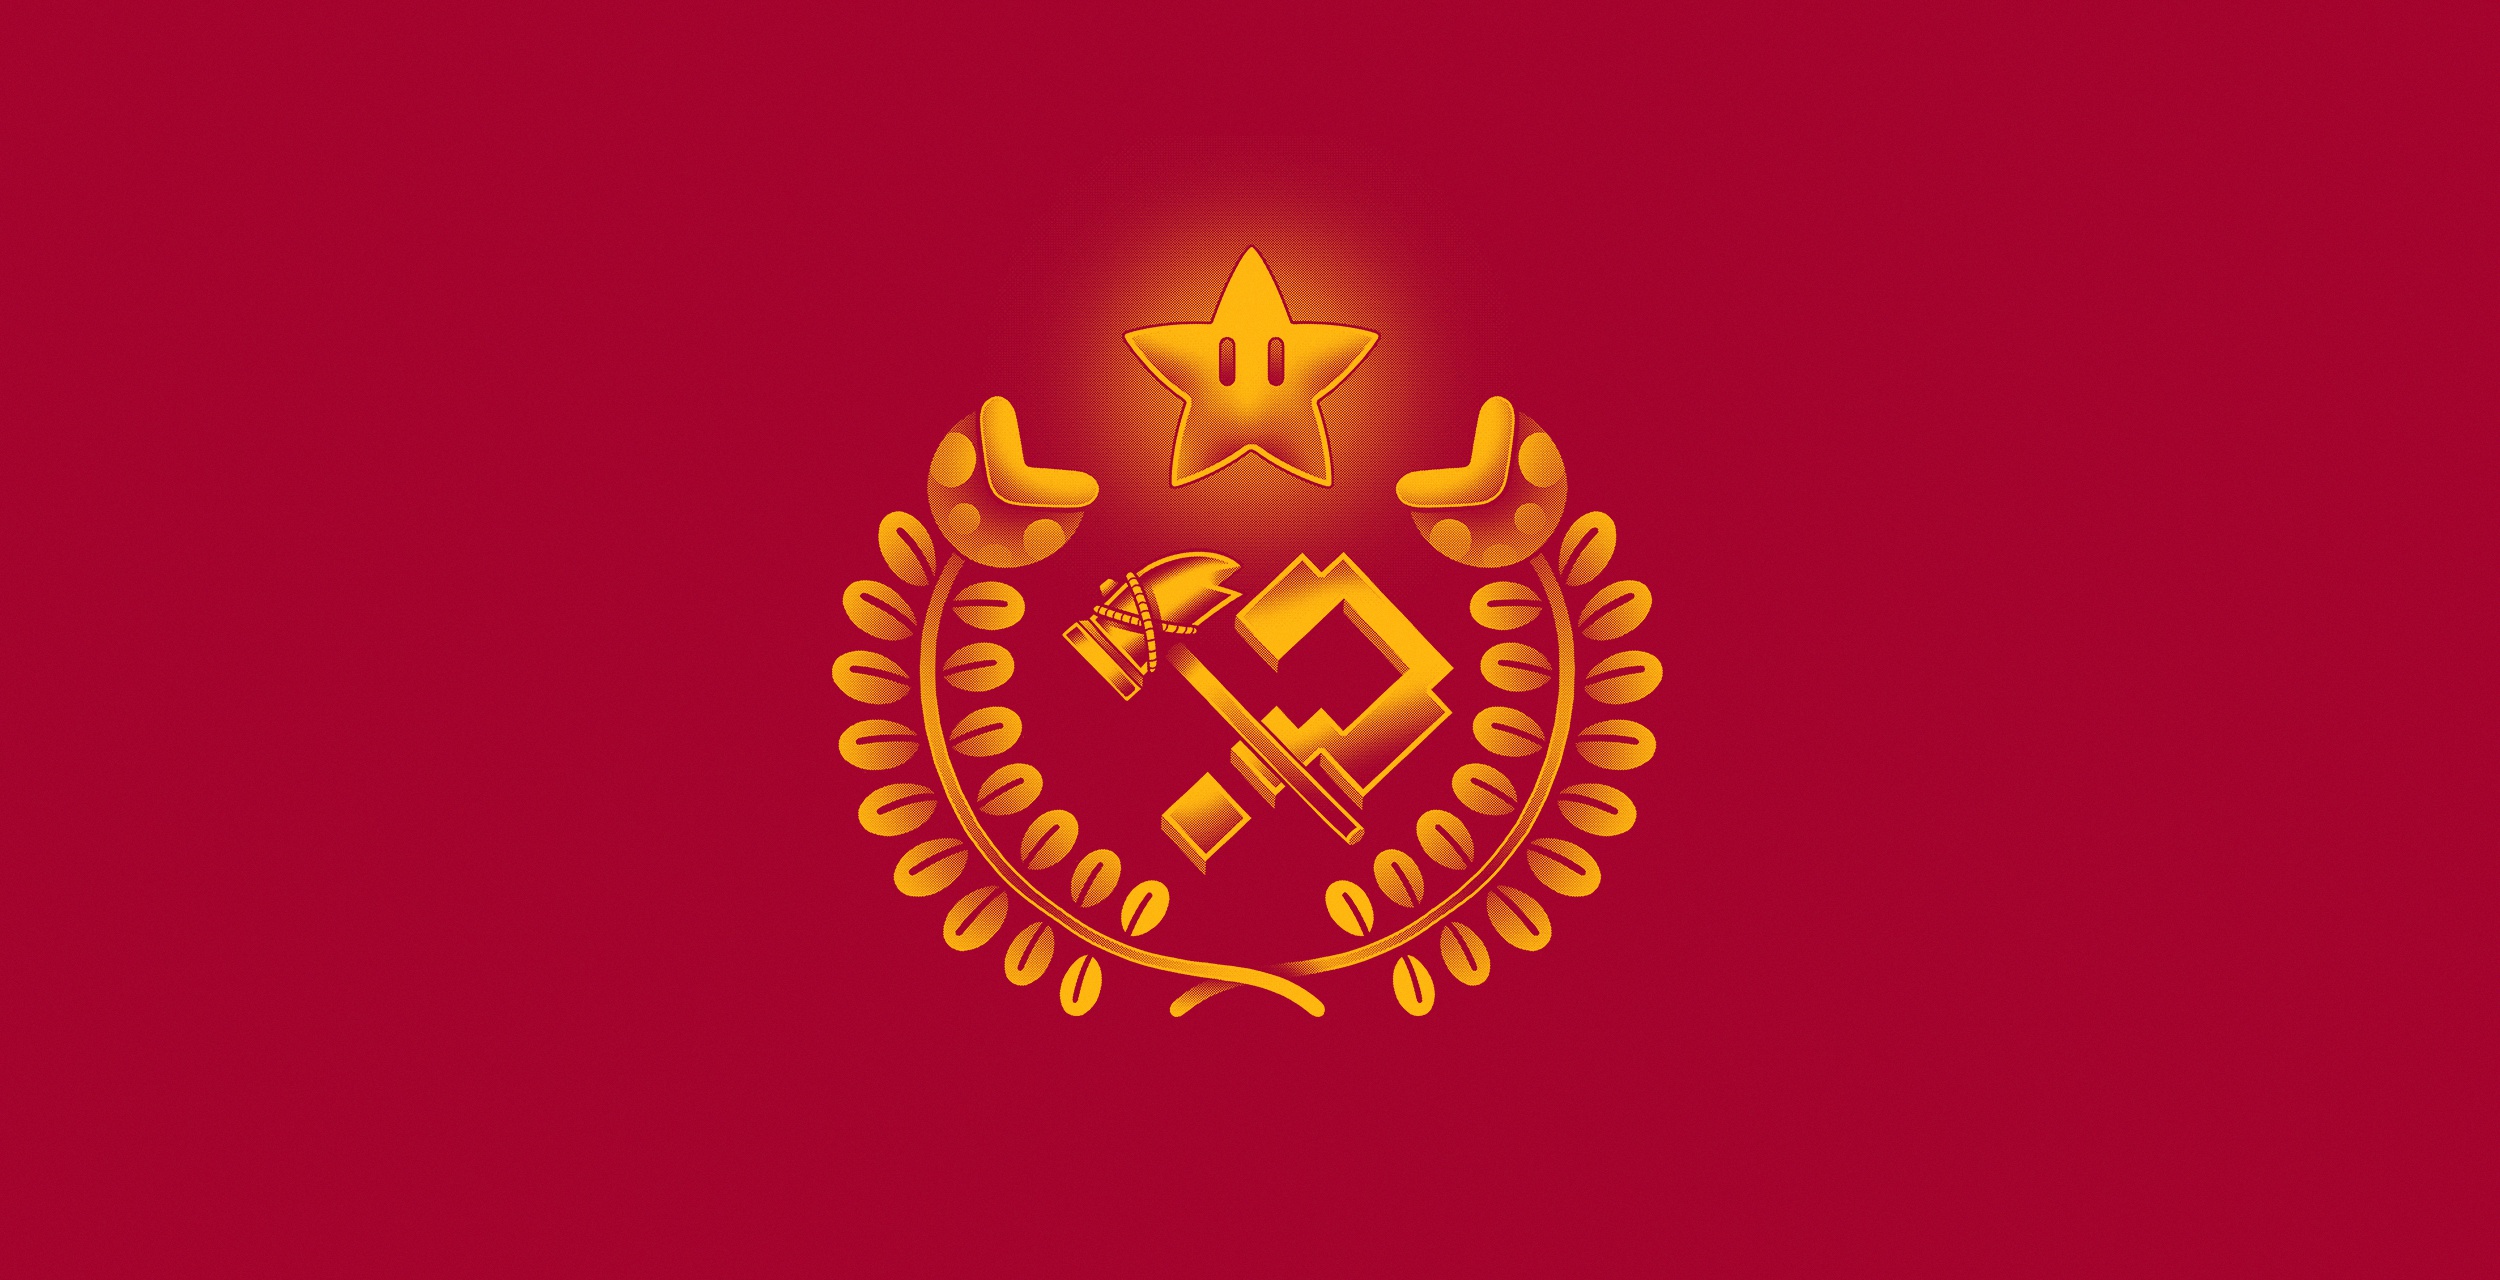 General 2500x1280 red background simple background video games Super Mario video game art red hammer and sickle